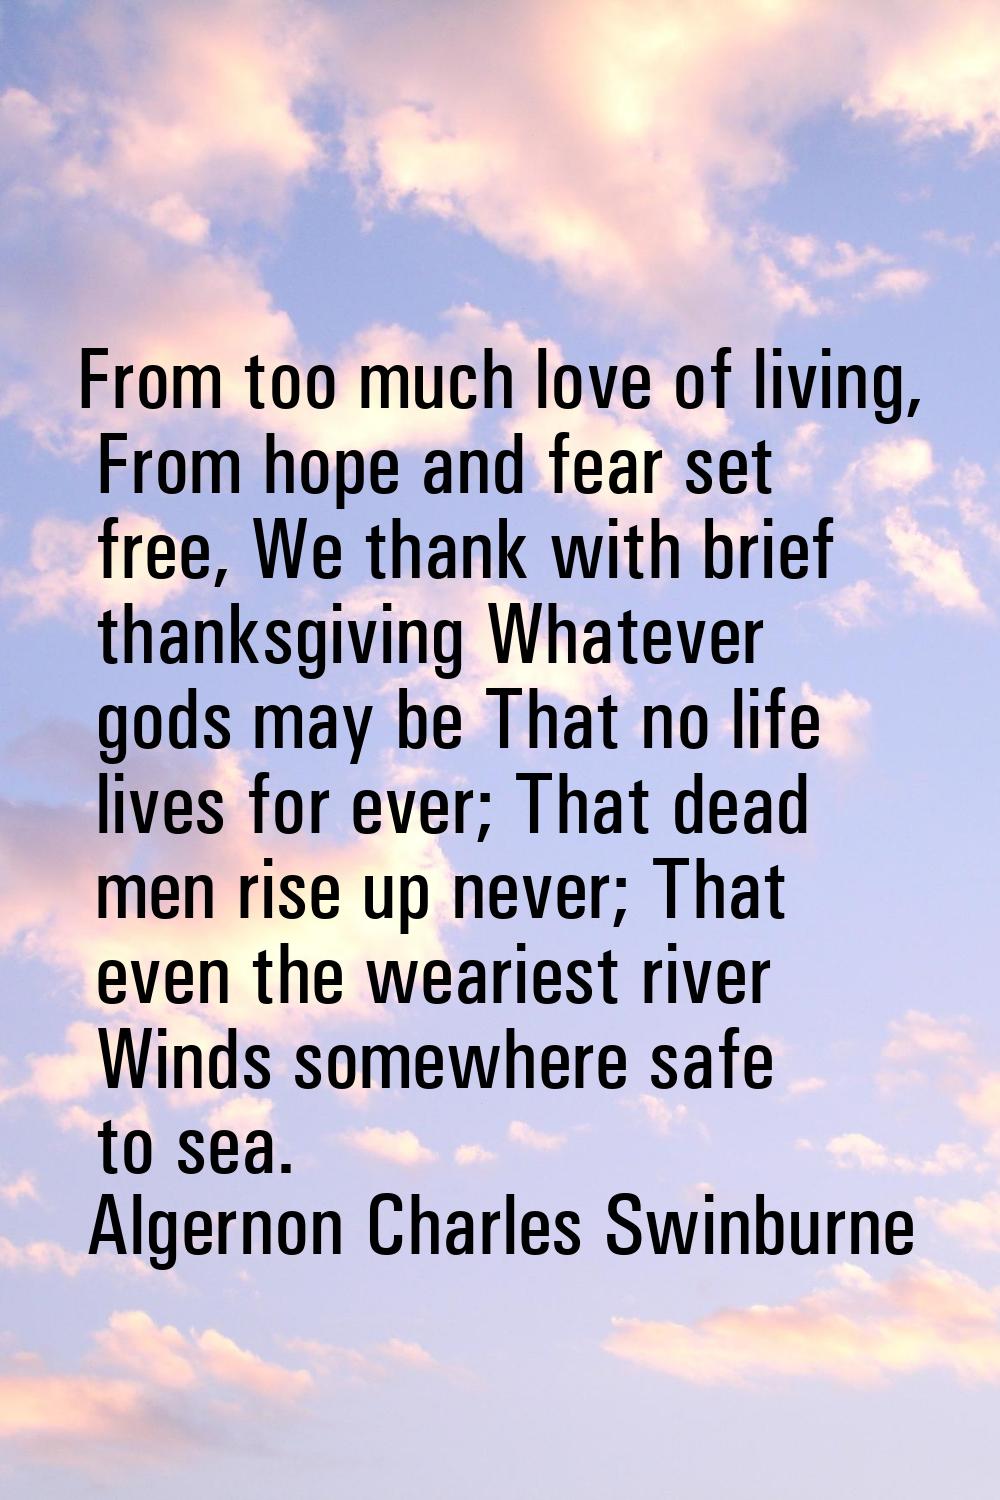 From too much love of living, From hope and fear set free, We thank with brief thanksgiving Whateve